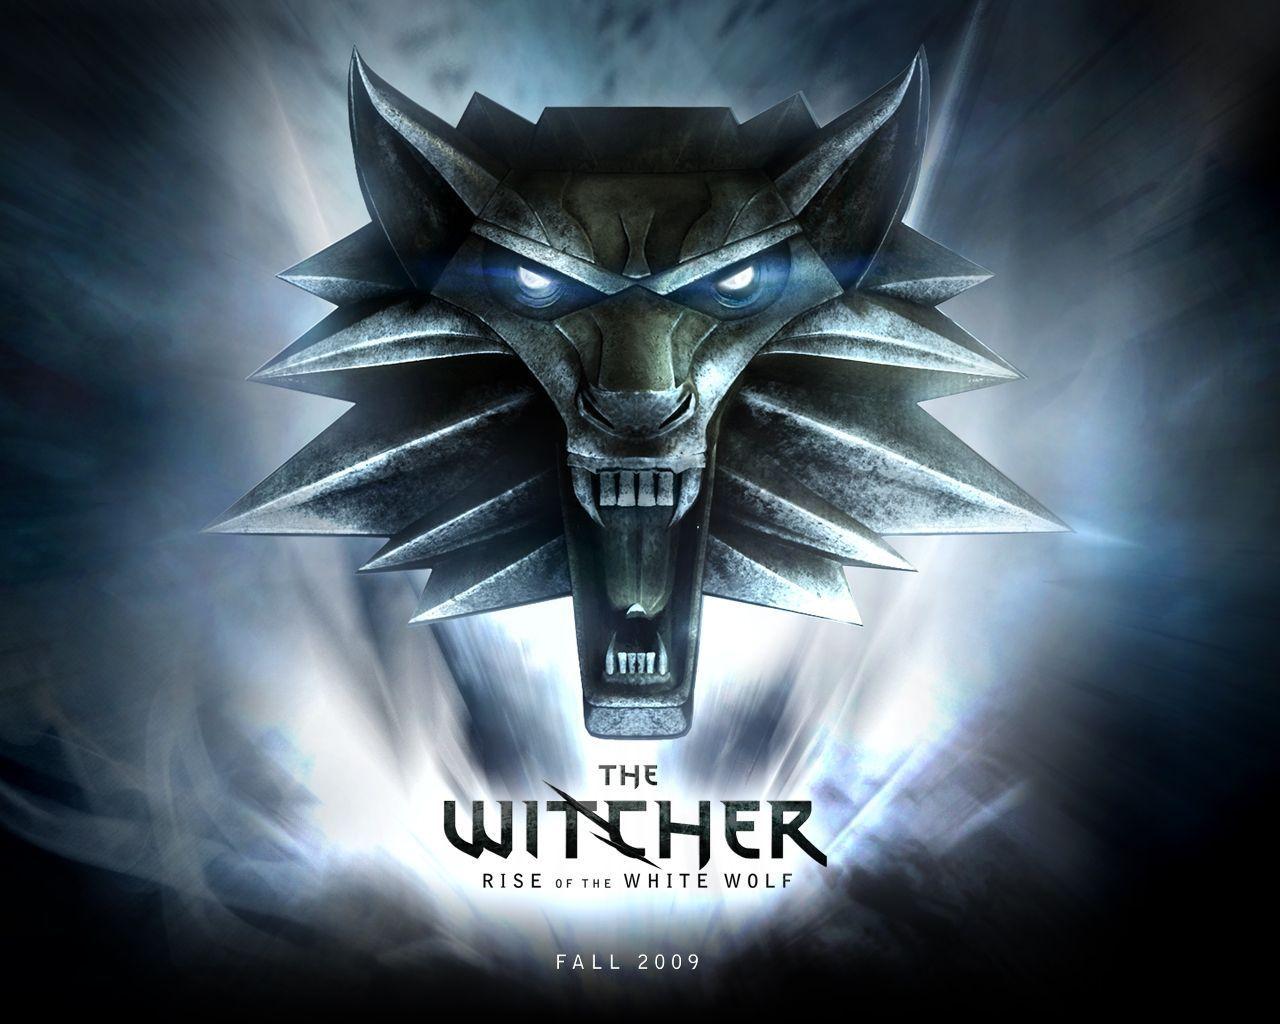 Download The Witcher Wallpaper 1280x1024